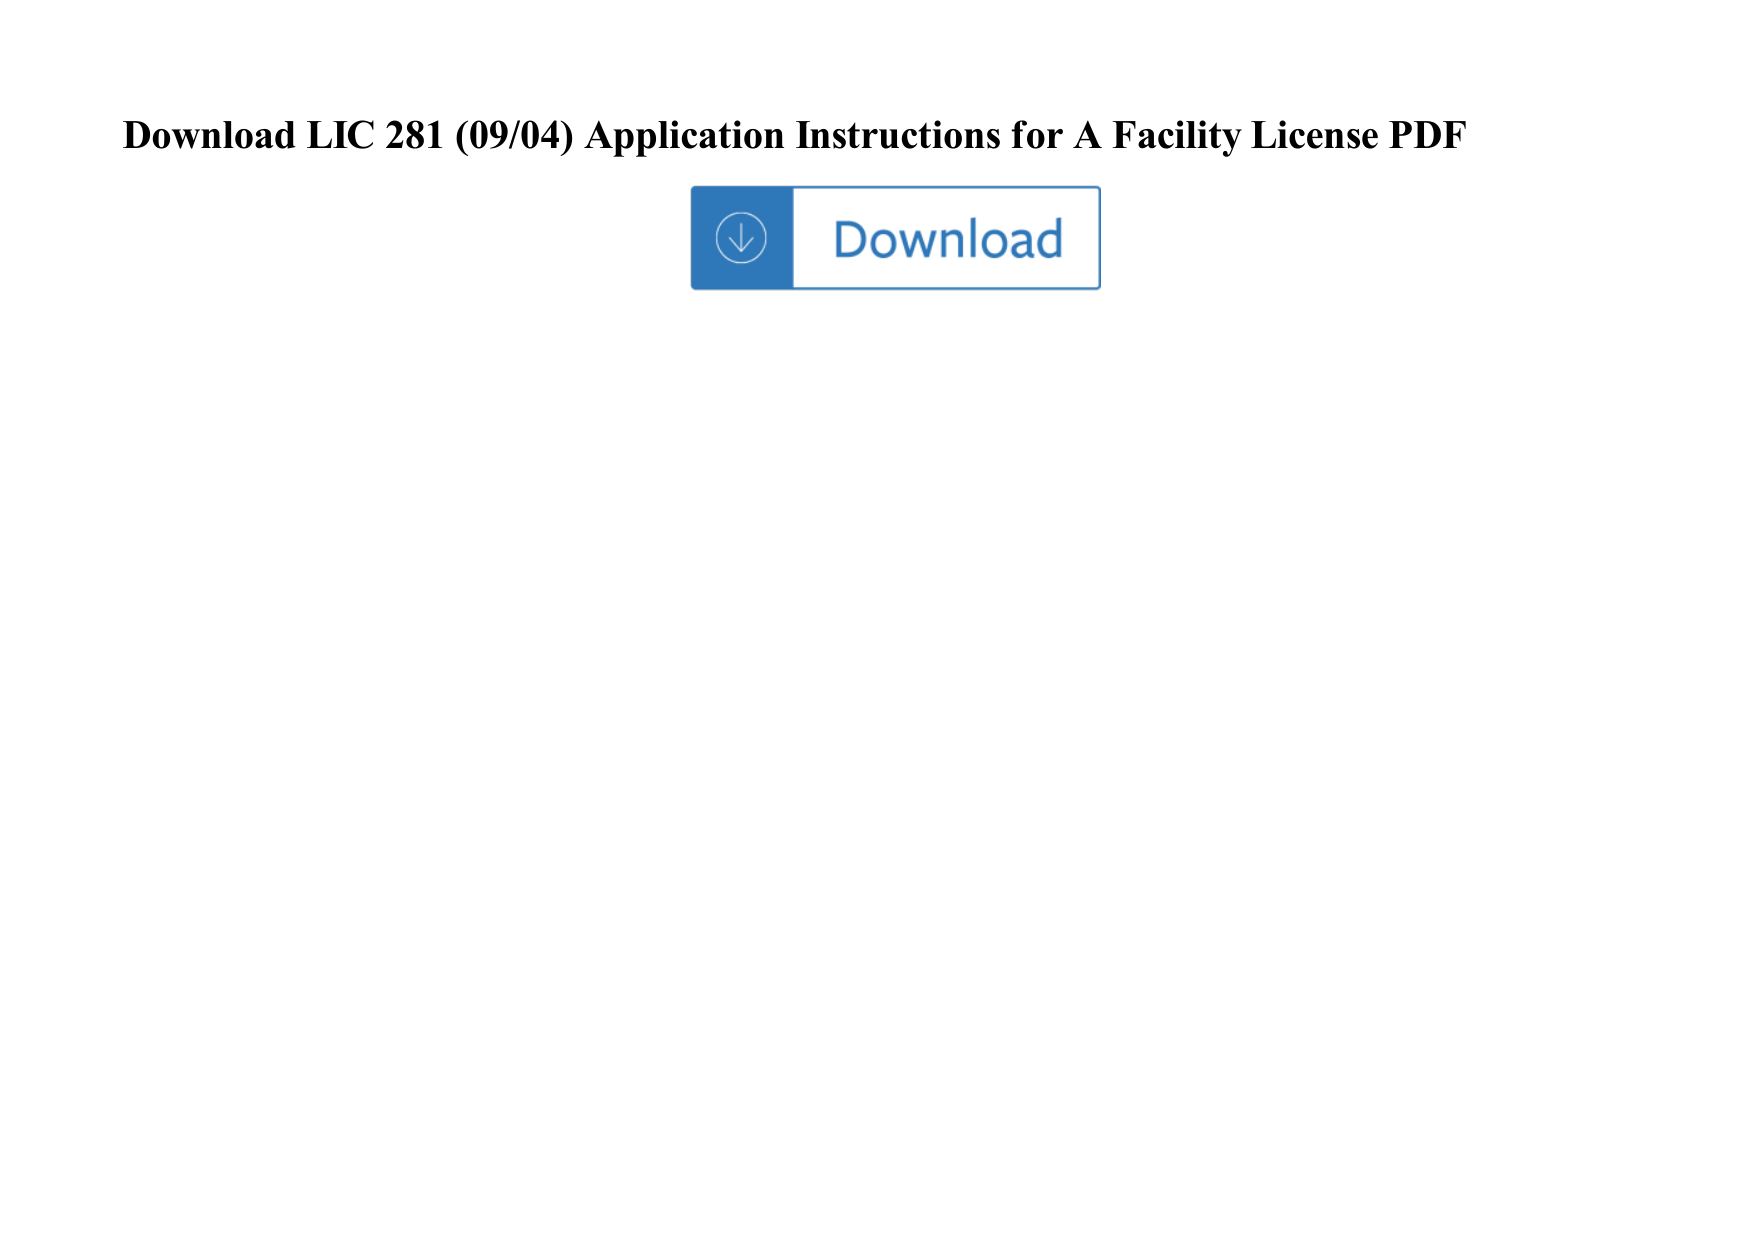 Page 1 of 1 - LIC 281 (09/04)  Application Instructions For A Facility License PDF Lic-281-09-04-application-instructions-for-a-facility-license